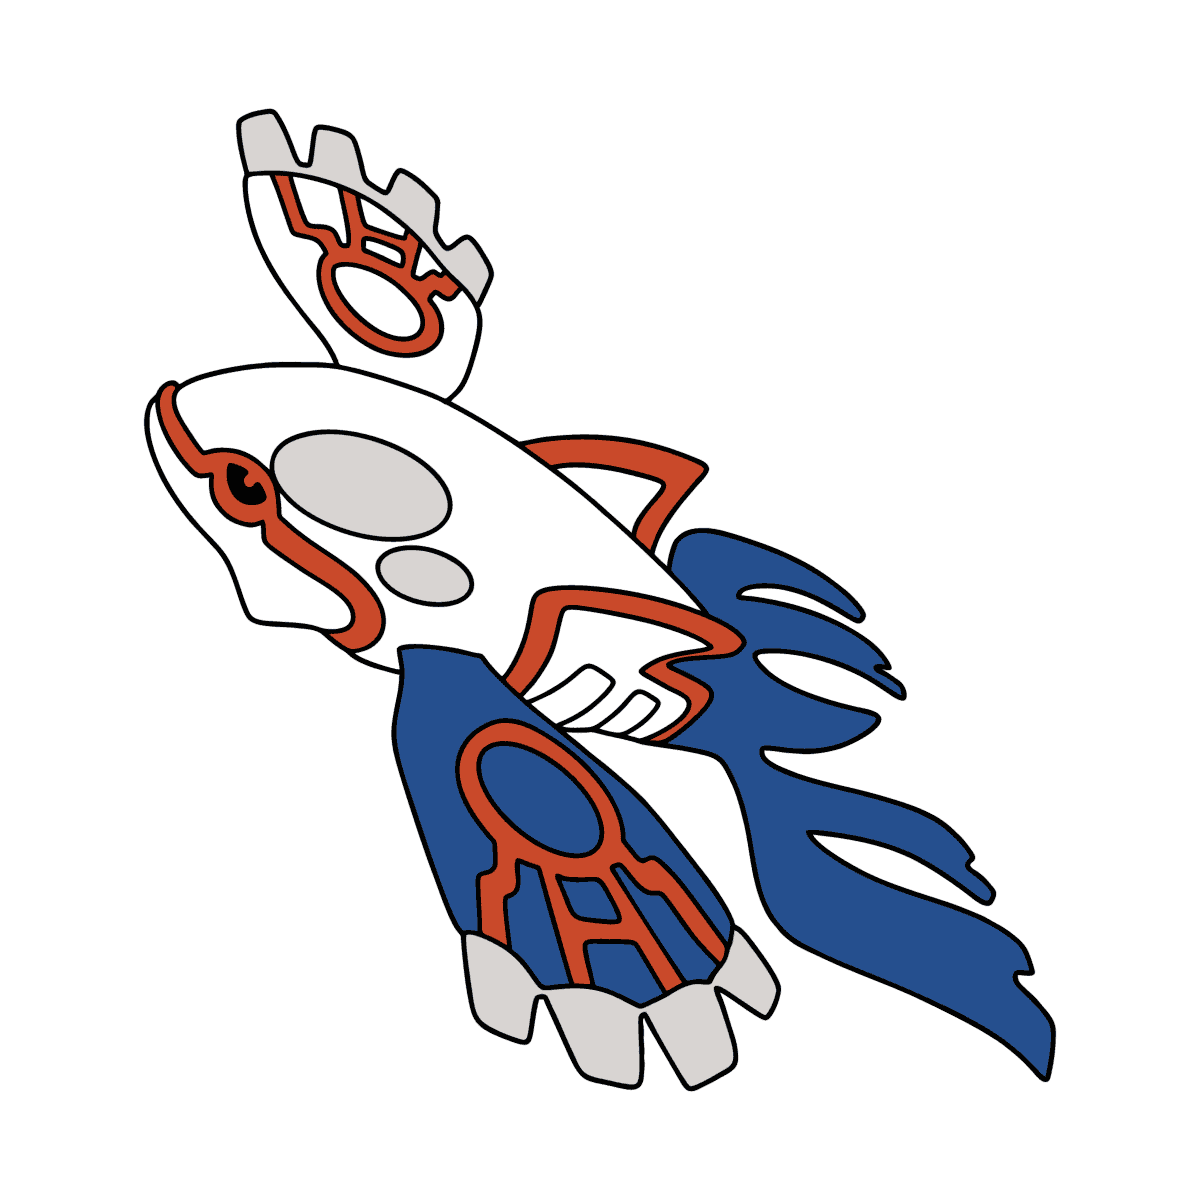 Coloring page Pokemon Go Kyogre ♥ Online and Print for Free! 